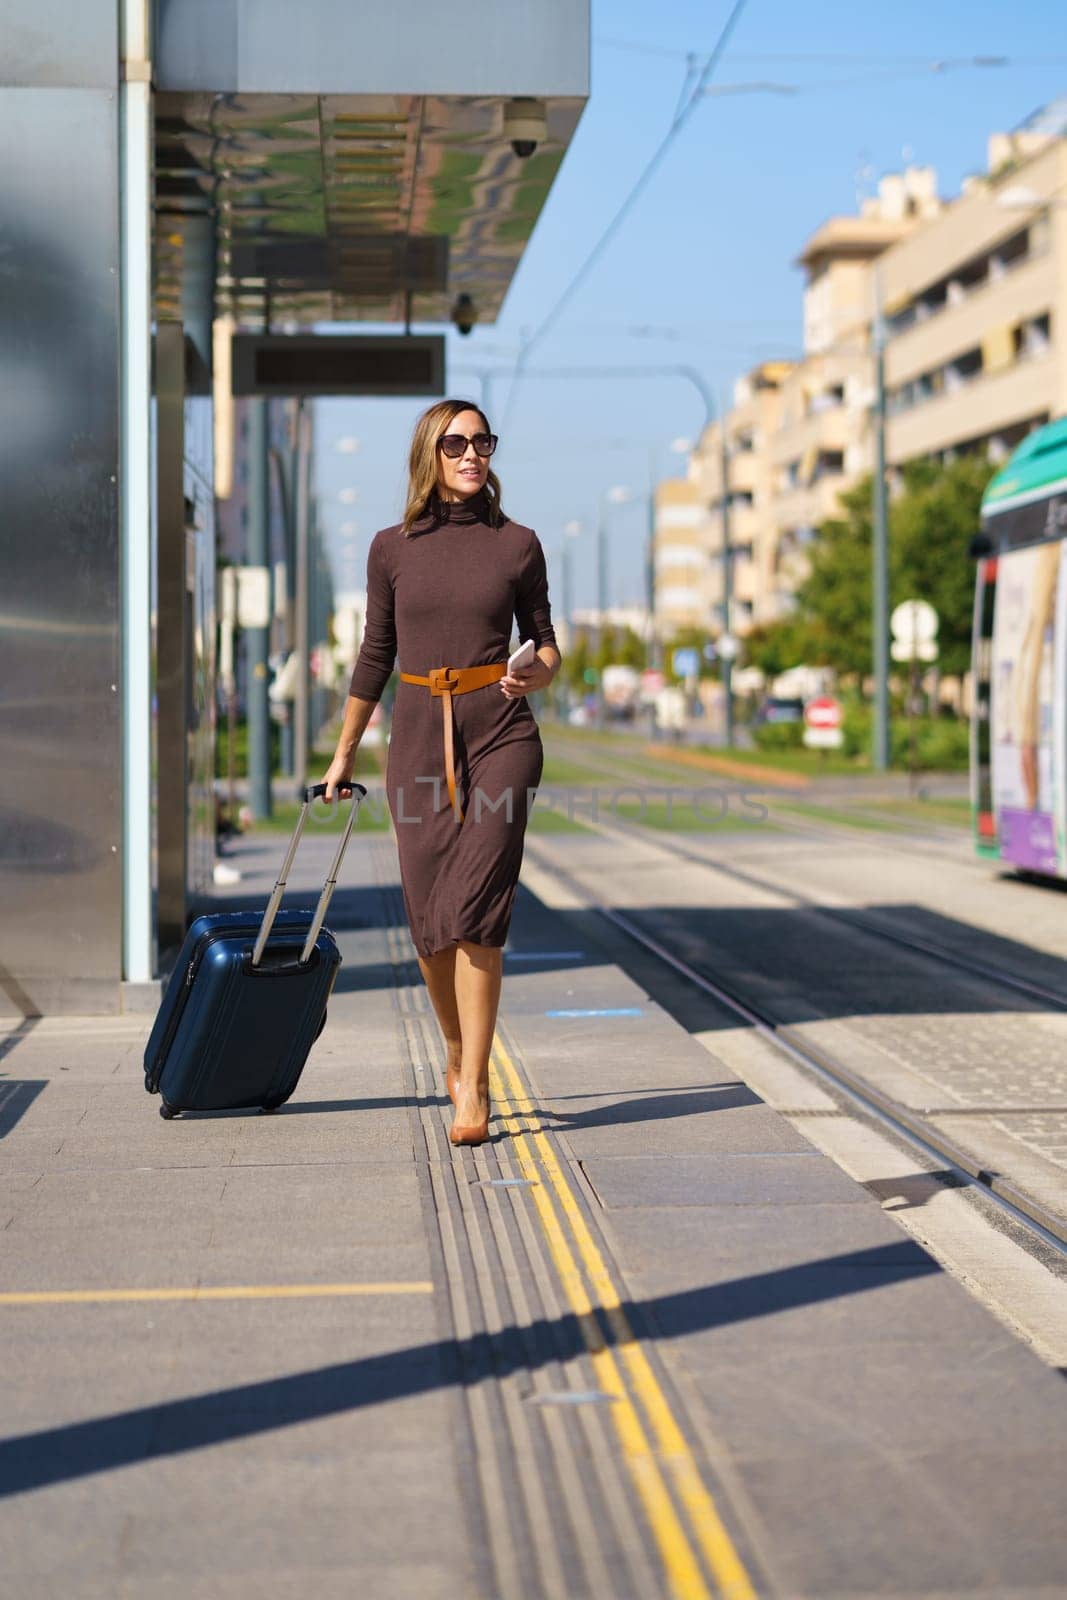 Full body stylish female entrepreneur with suitcase and cellphone walking on platform near tramway during business trip in city in daytime